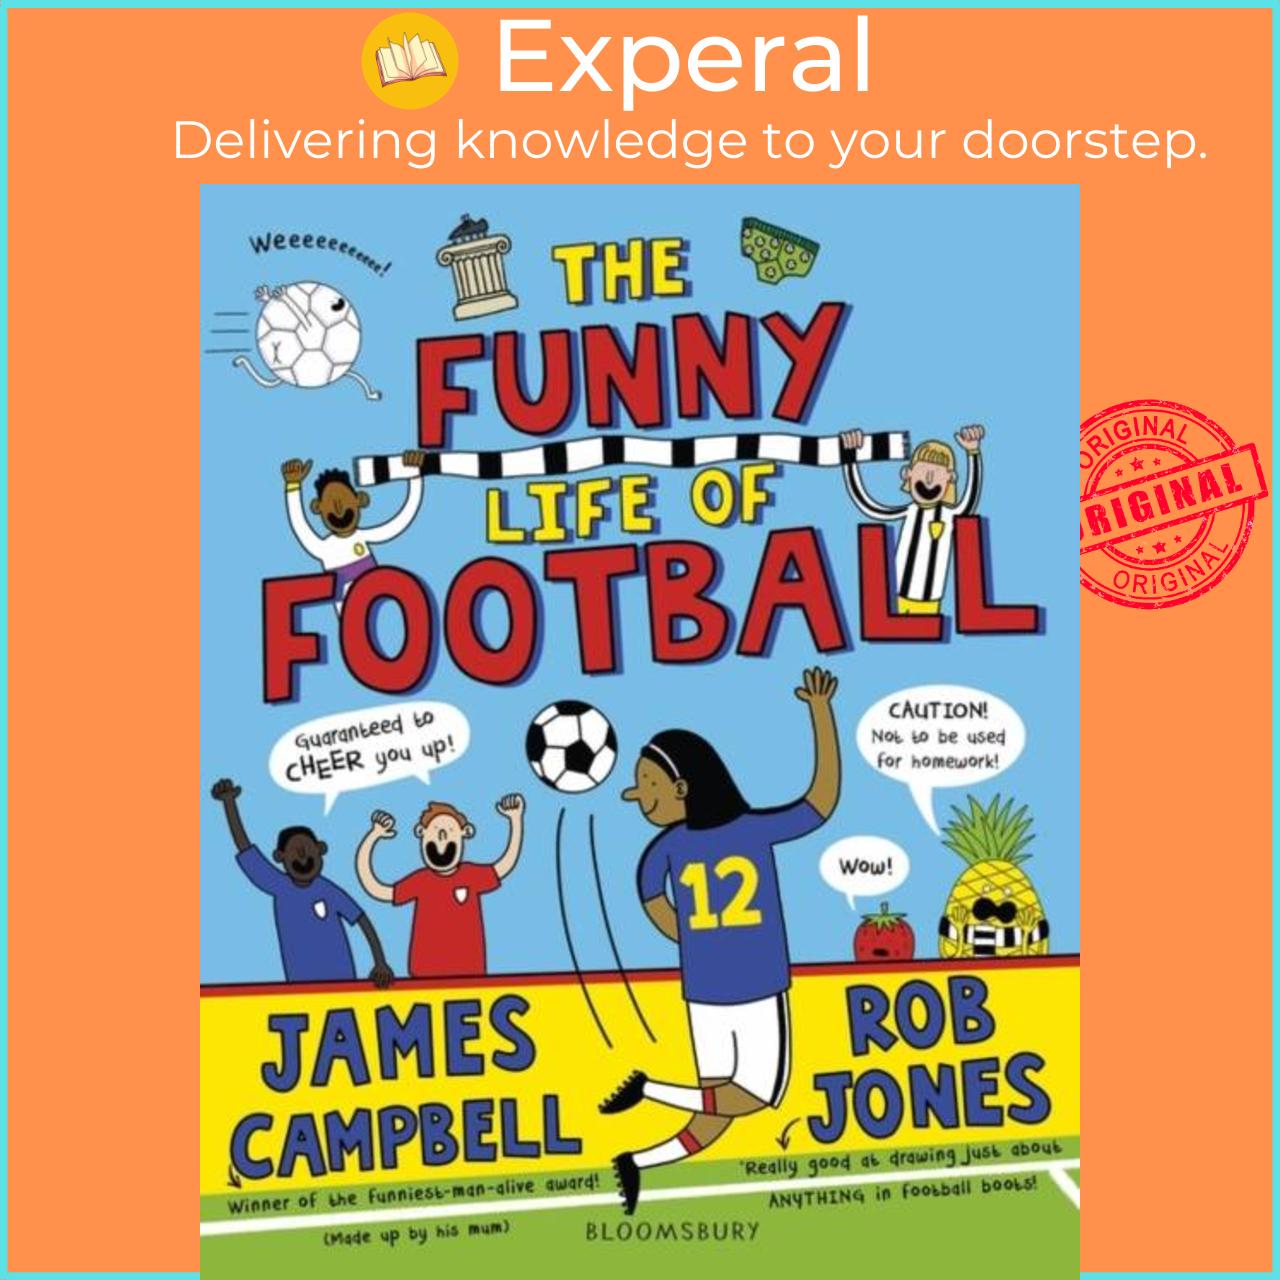 Sách - The Funny Life of Football - WINNER of The Sunday Times Children's Sports Bo by Rob Jones (UK edition, paperback)